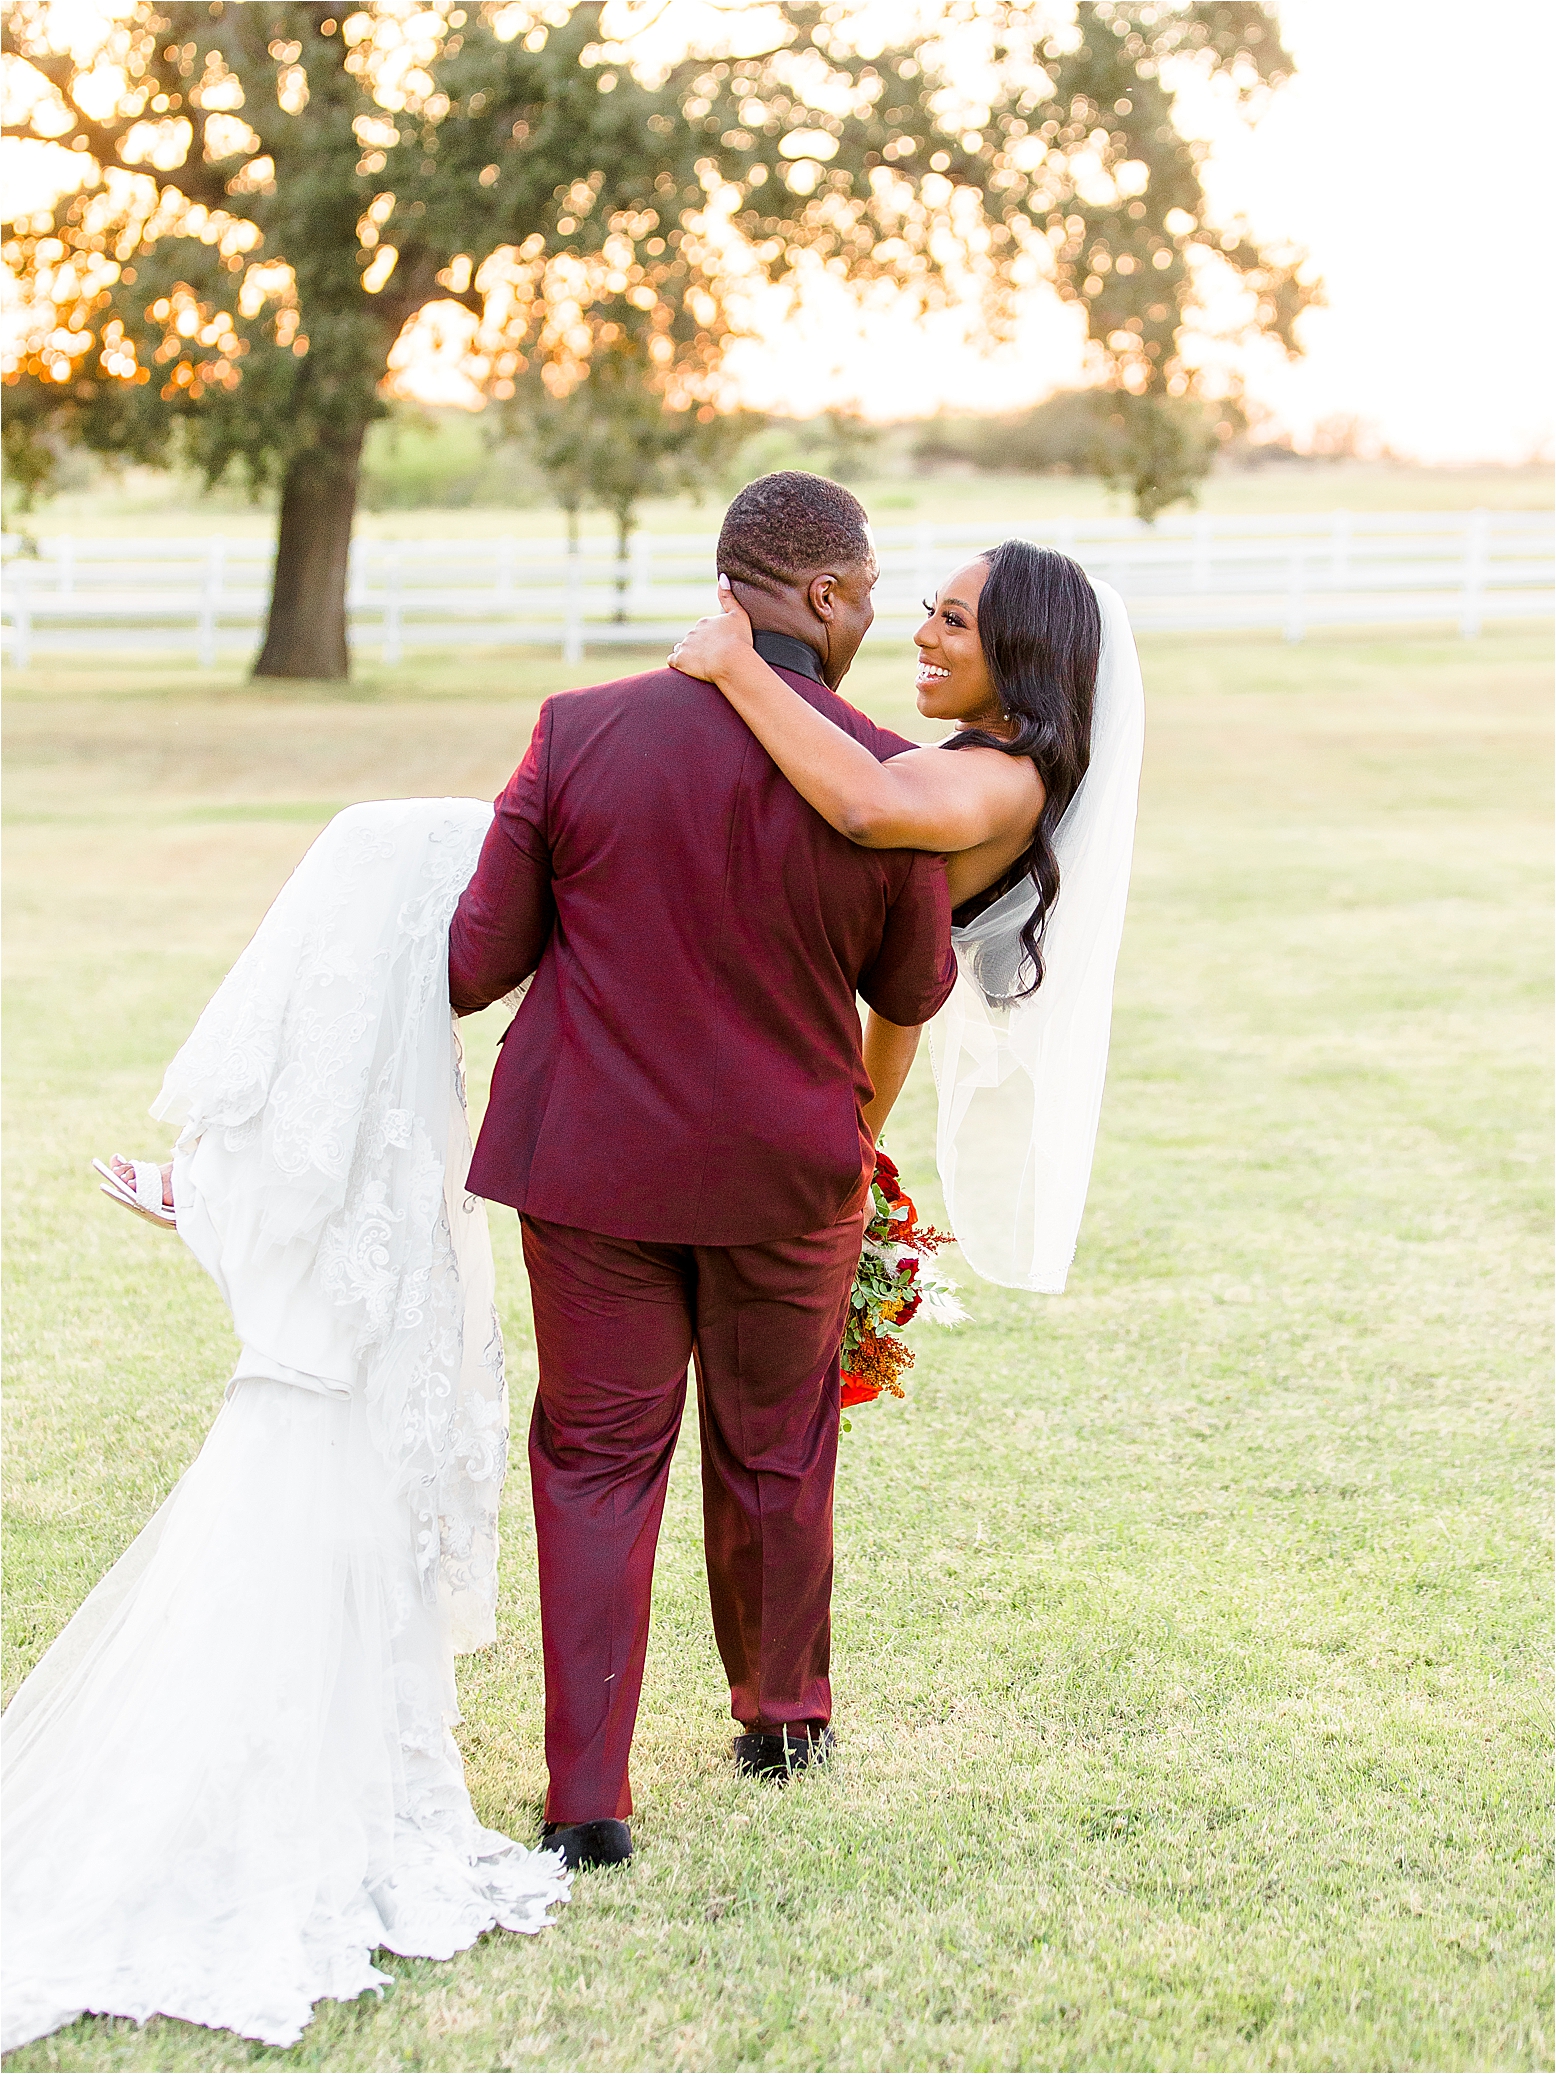 A groom carries his bride off into the sunset at The Milestone by Boerne Wedding Photographer Jillian Hogan 